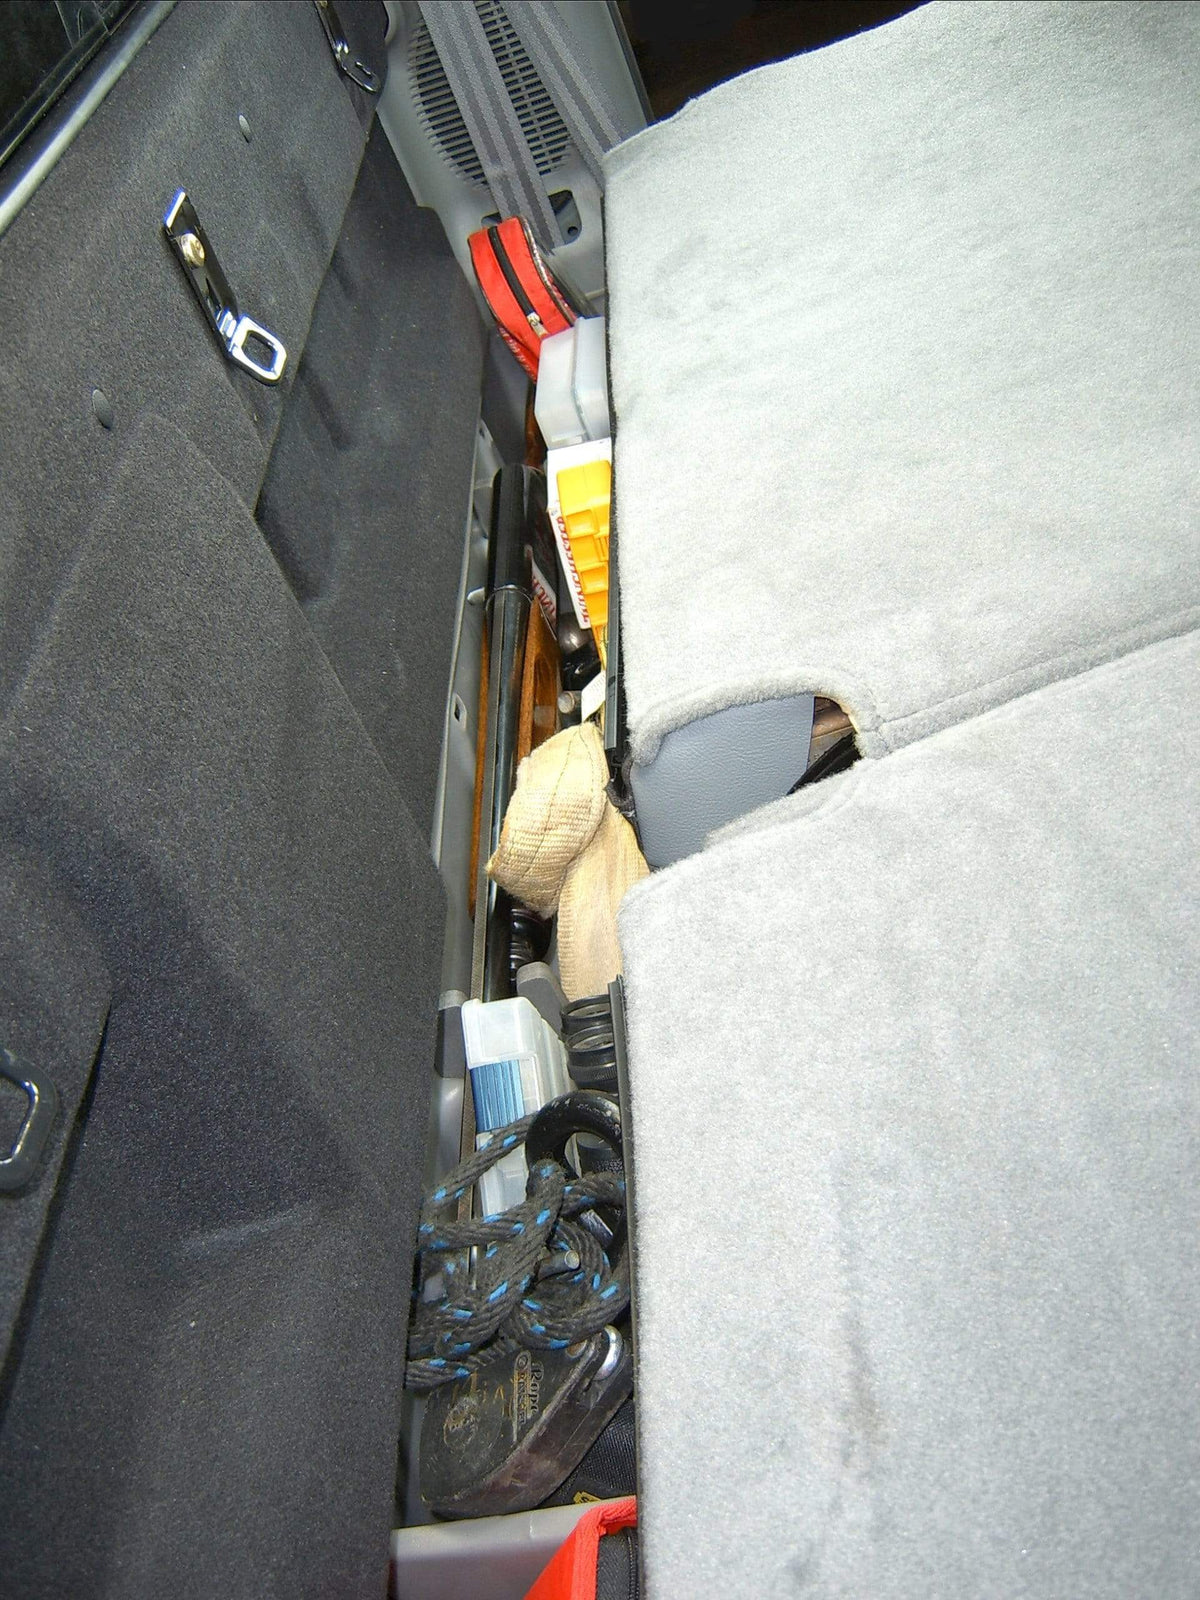 DU-HA 2000-2007 Ford F250-F550 Super Duty  Crew Cab Behind-the-Seat Cab Storage Armadillo Safe and Vault